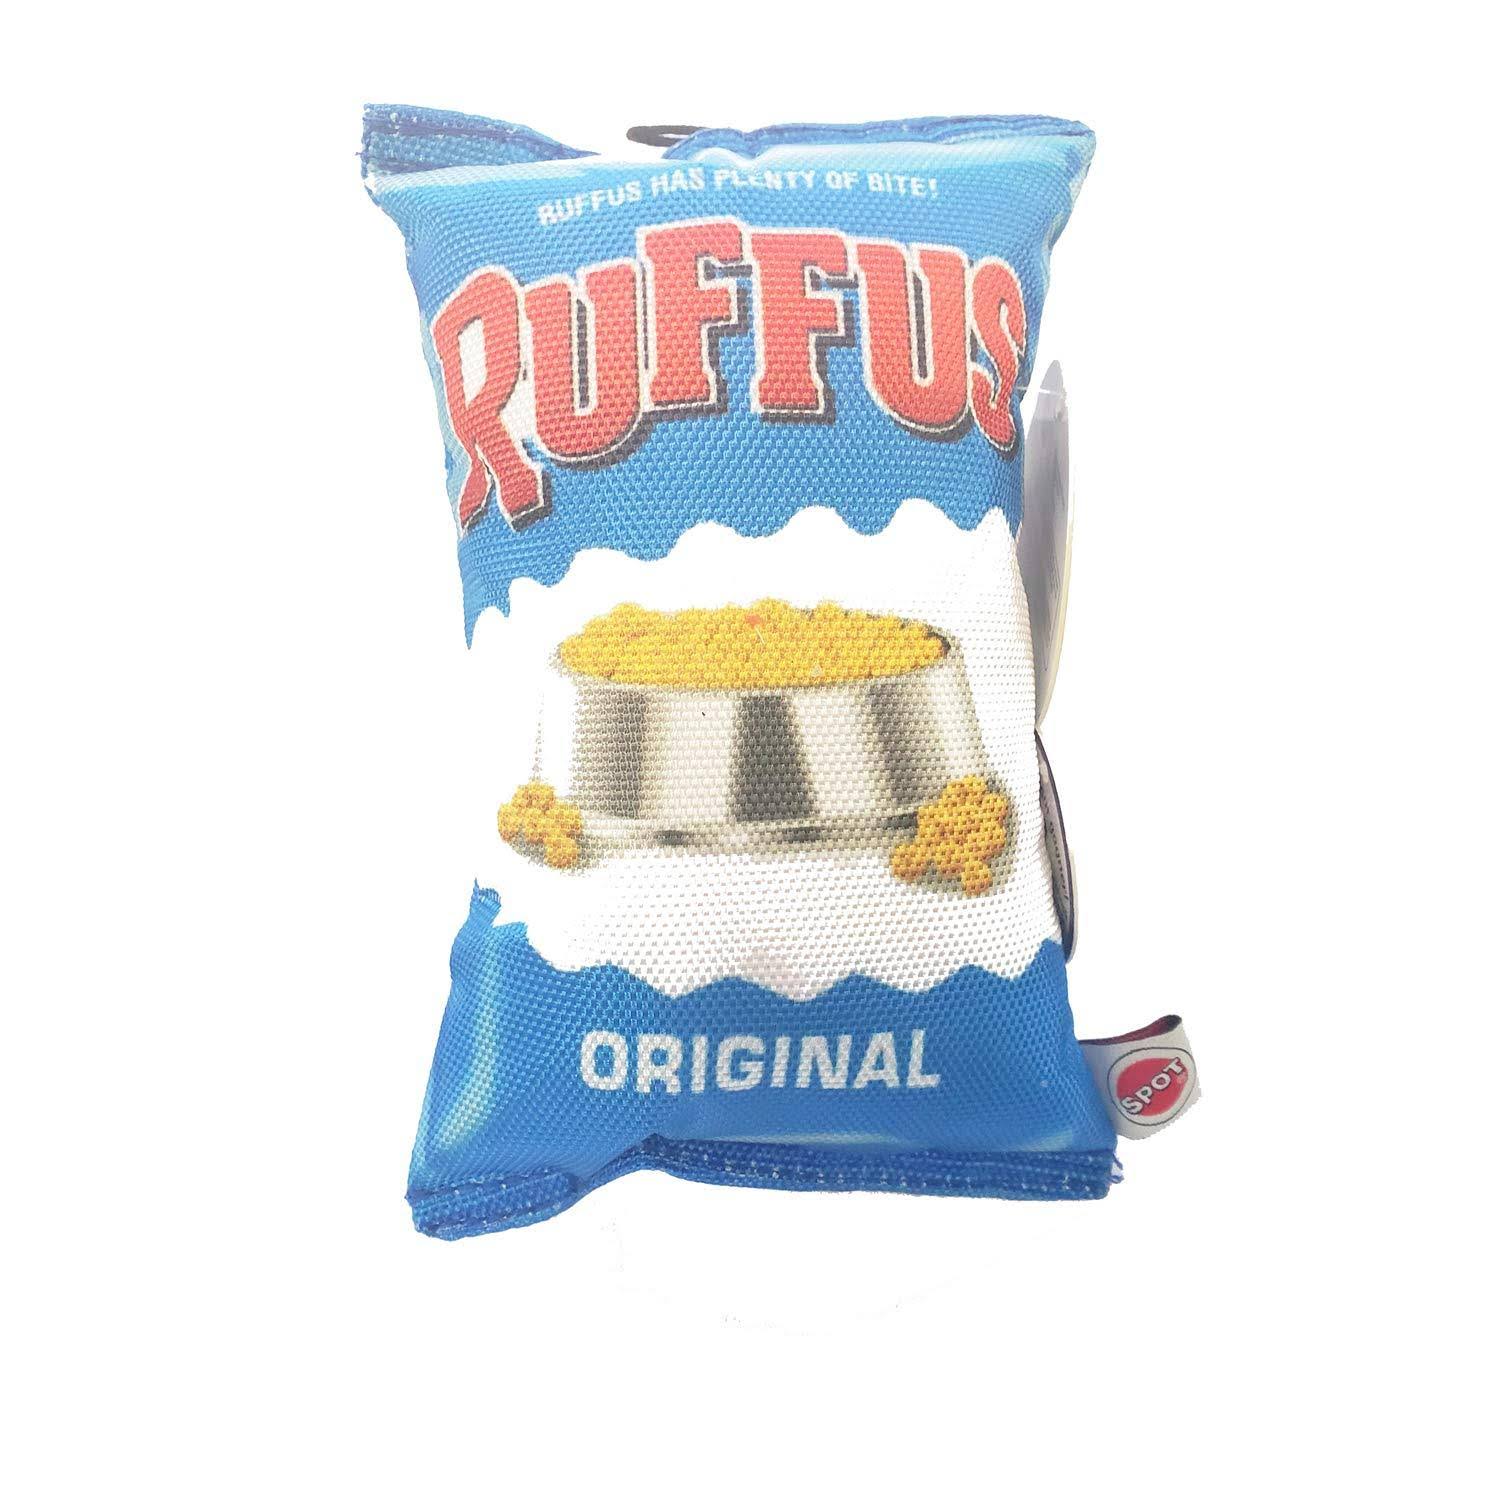 Spot Ethical Pet Fun Food Ruffus Chips Dog Toy